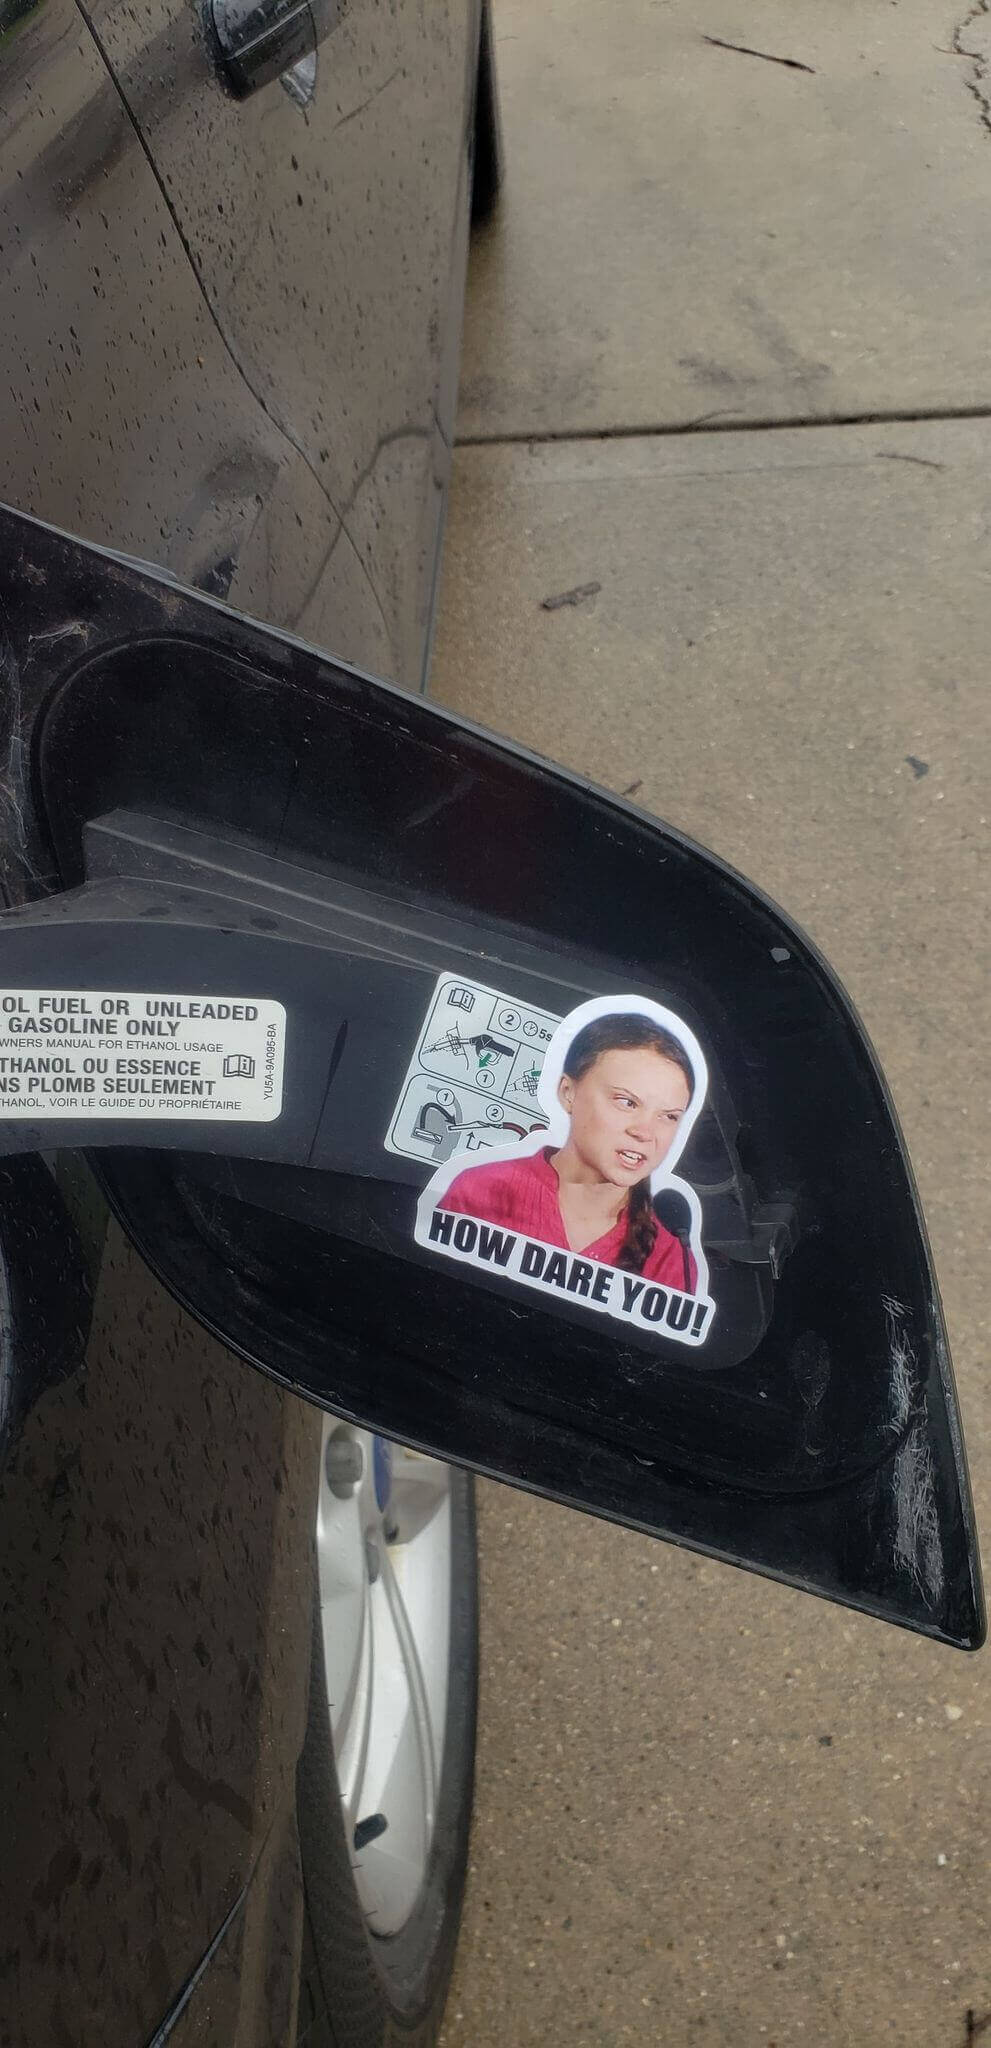 How DARE you - Bubble-free sticker for your gas tank / lawn mower / snow blower / leaf blower / gas engine